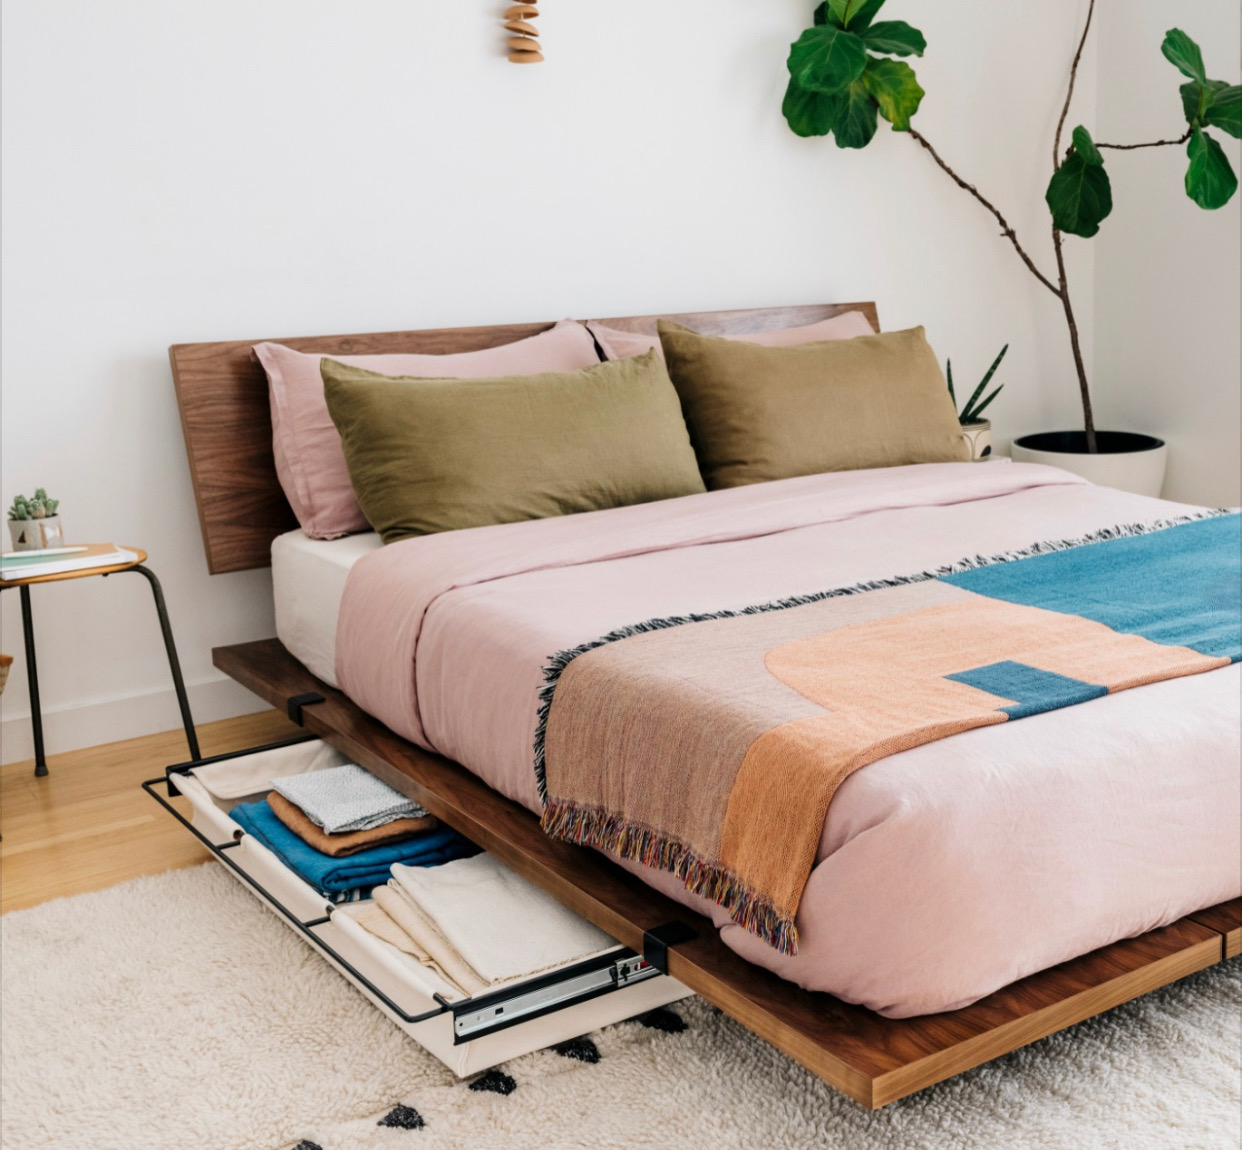 Low Profile Platform Bed Frames, Why Are Platform Beds So Low To The Ground